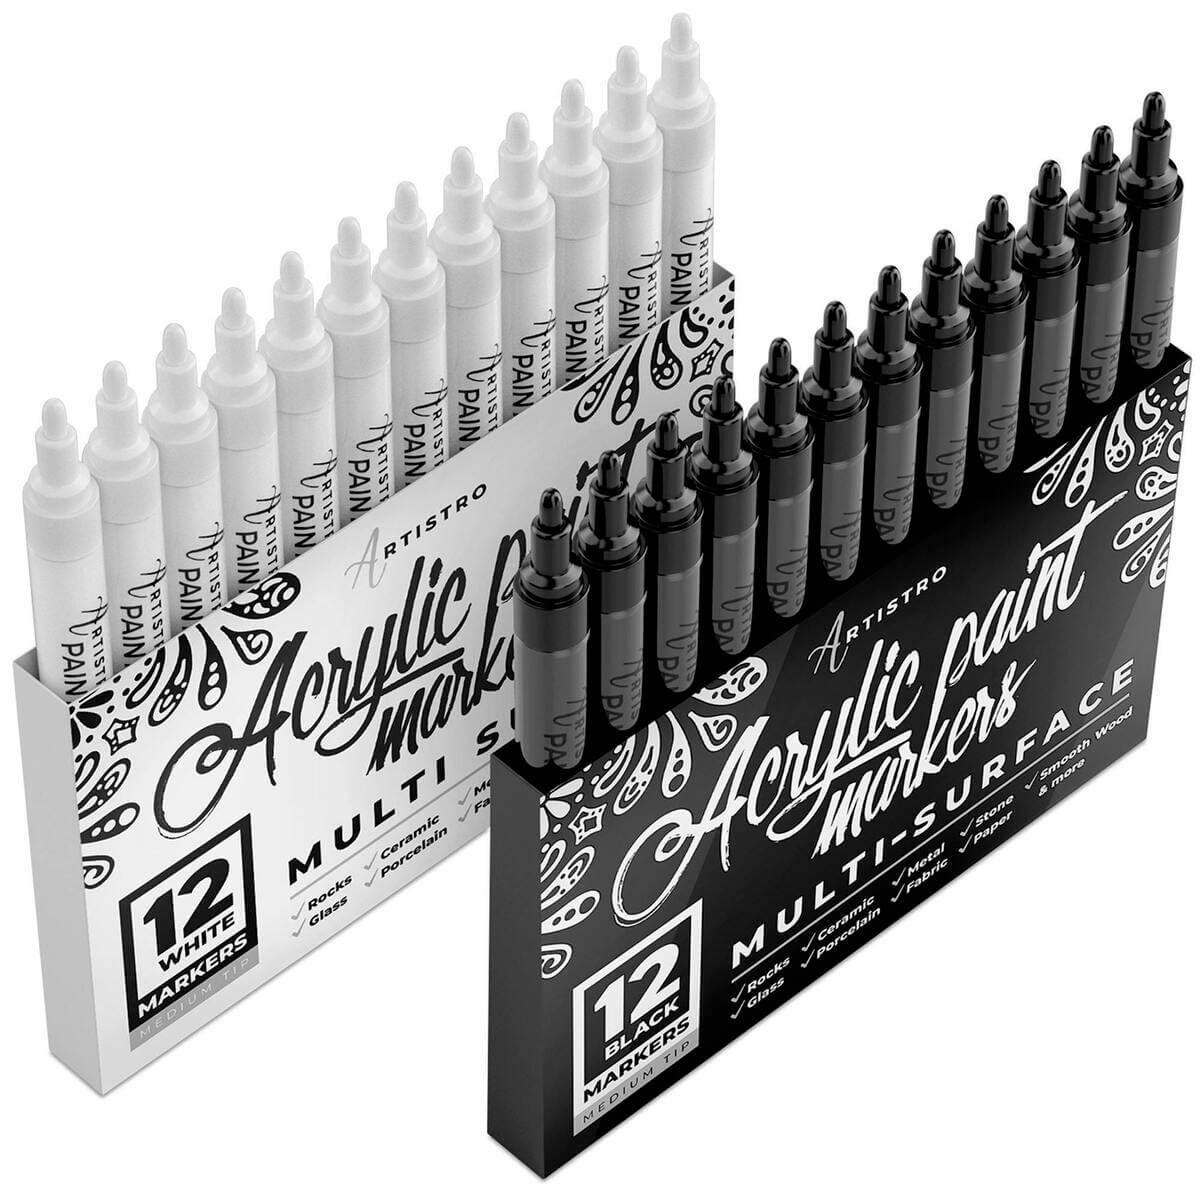 40 Acrylic Markers Extra Fine Tip 30 Multicolor Paint Pens 5 White Markers  5 Black Paint Pens for Rock, Wood, Glass, Ceramic Painting 